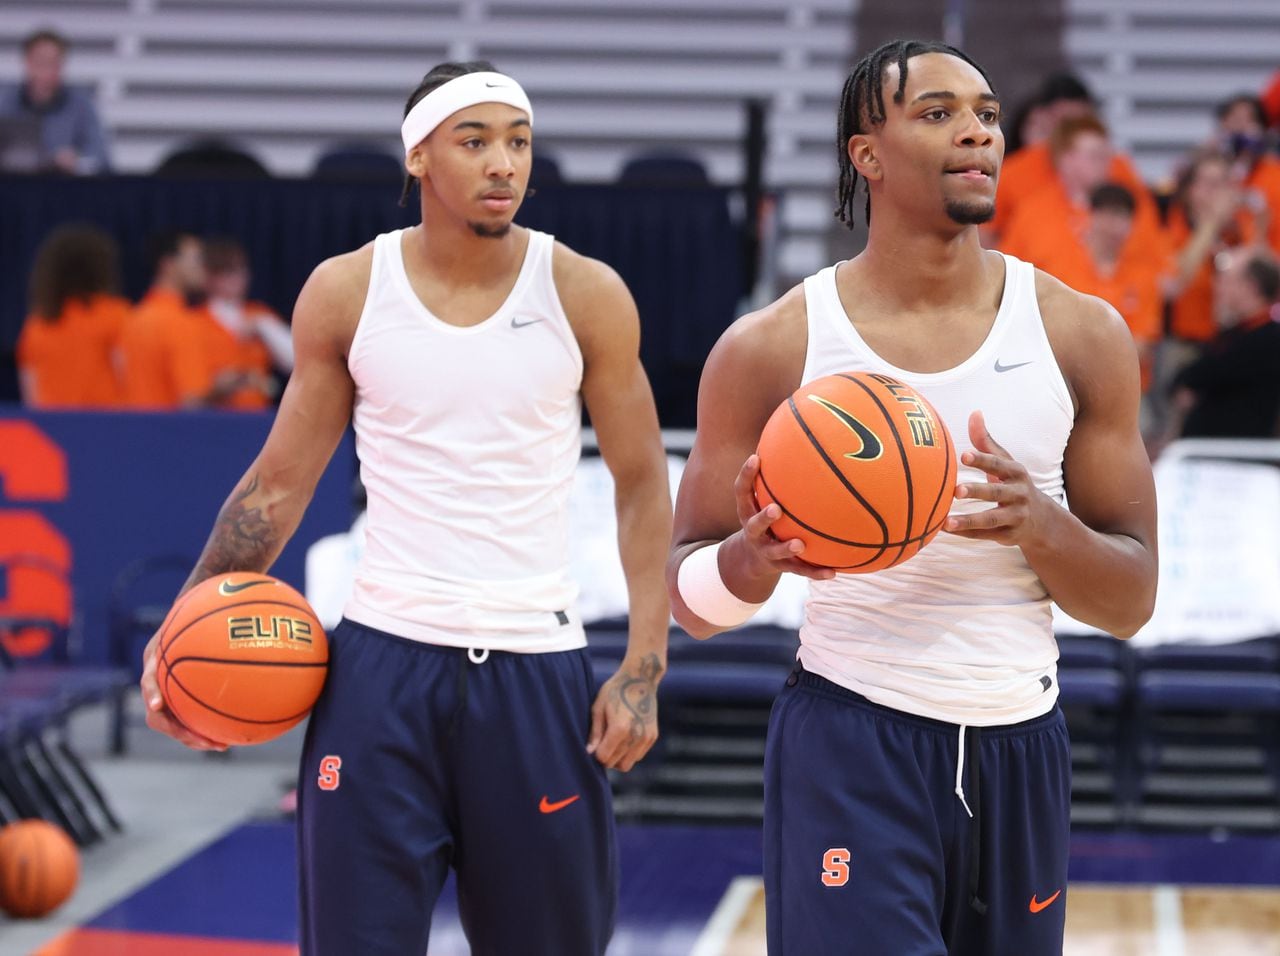 The Syracuse men’s basketball team takes on St. Rose in an exhibition game at the JMA Wireless Dome in Syracuse N.Y., Nov. 1, 2023.
Dennis Nett | dnett@syracuse.com